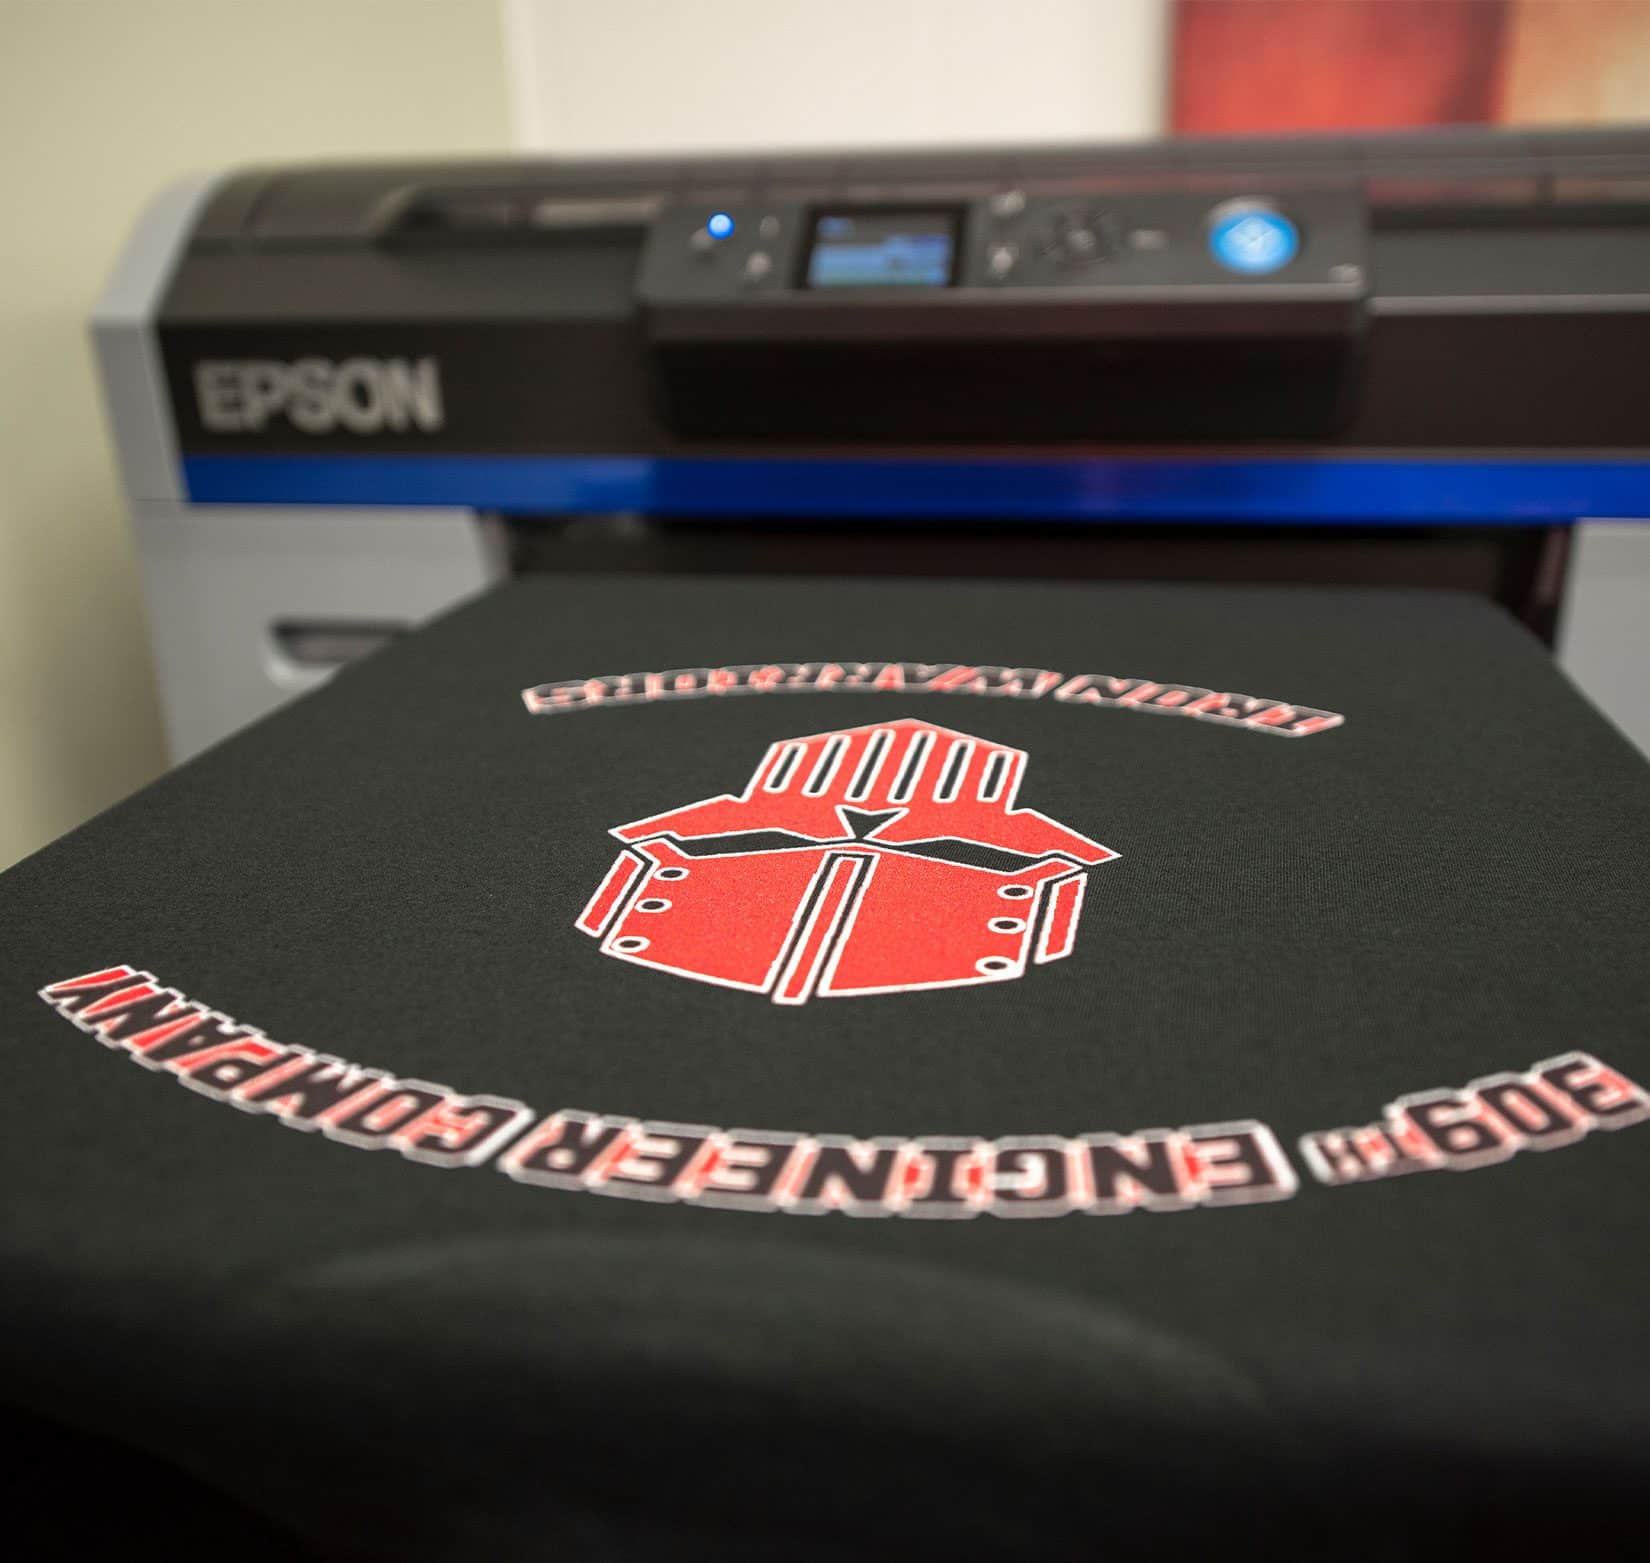 A freshly screen printed black t-shirt coming out of a printer